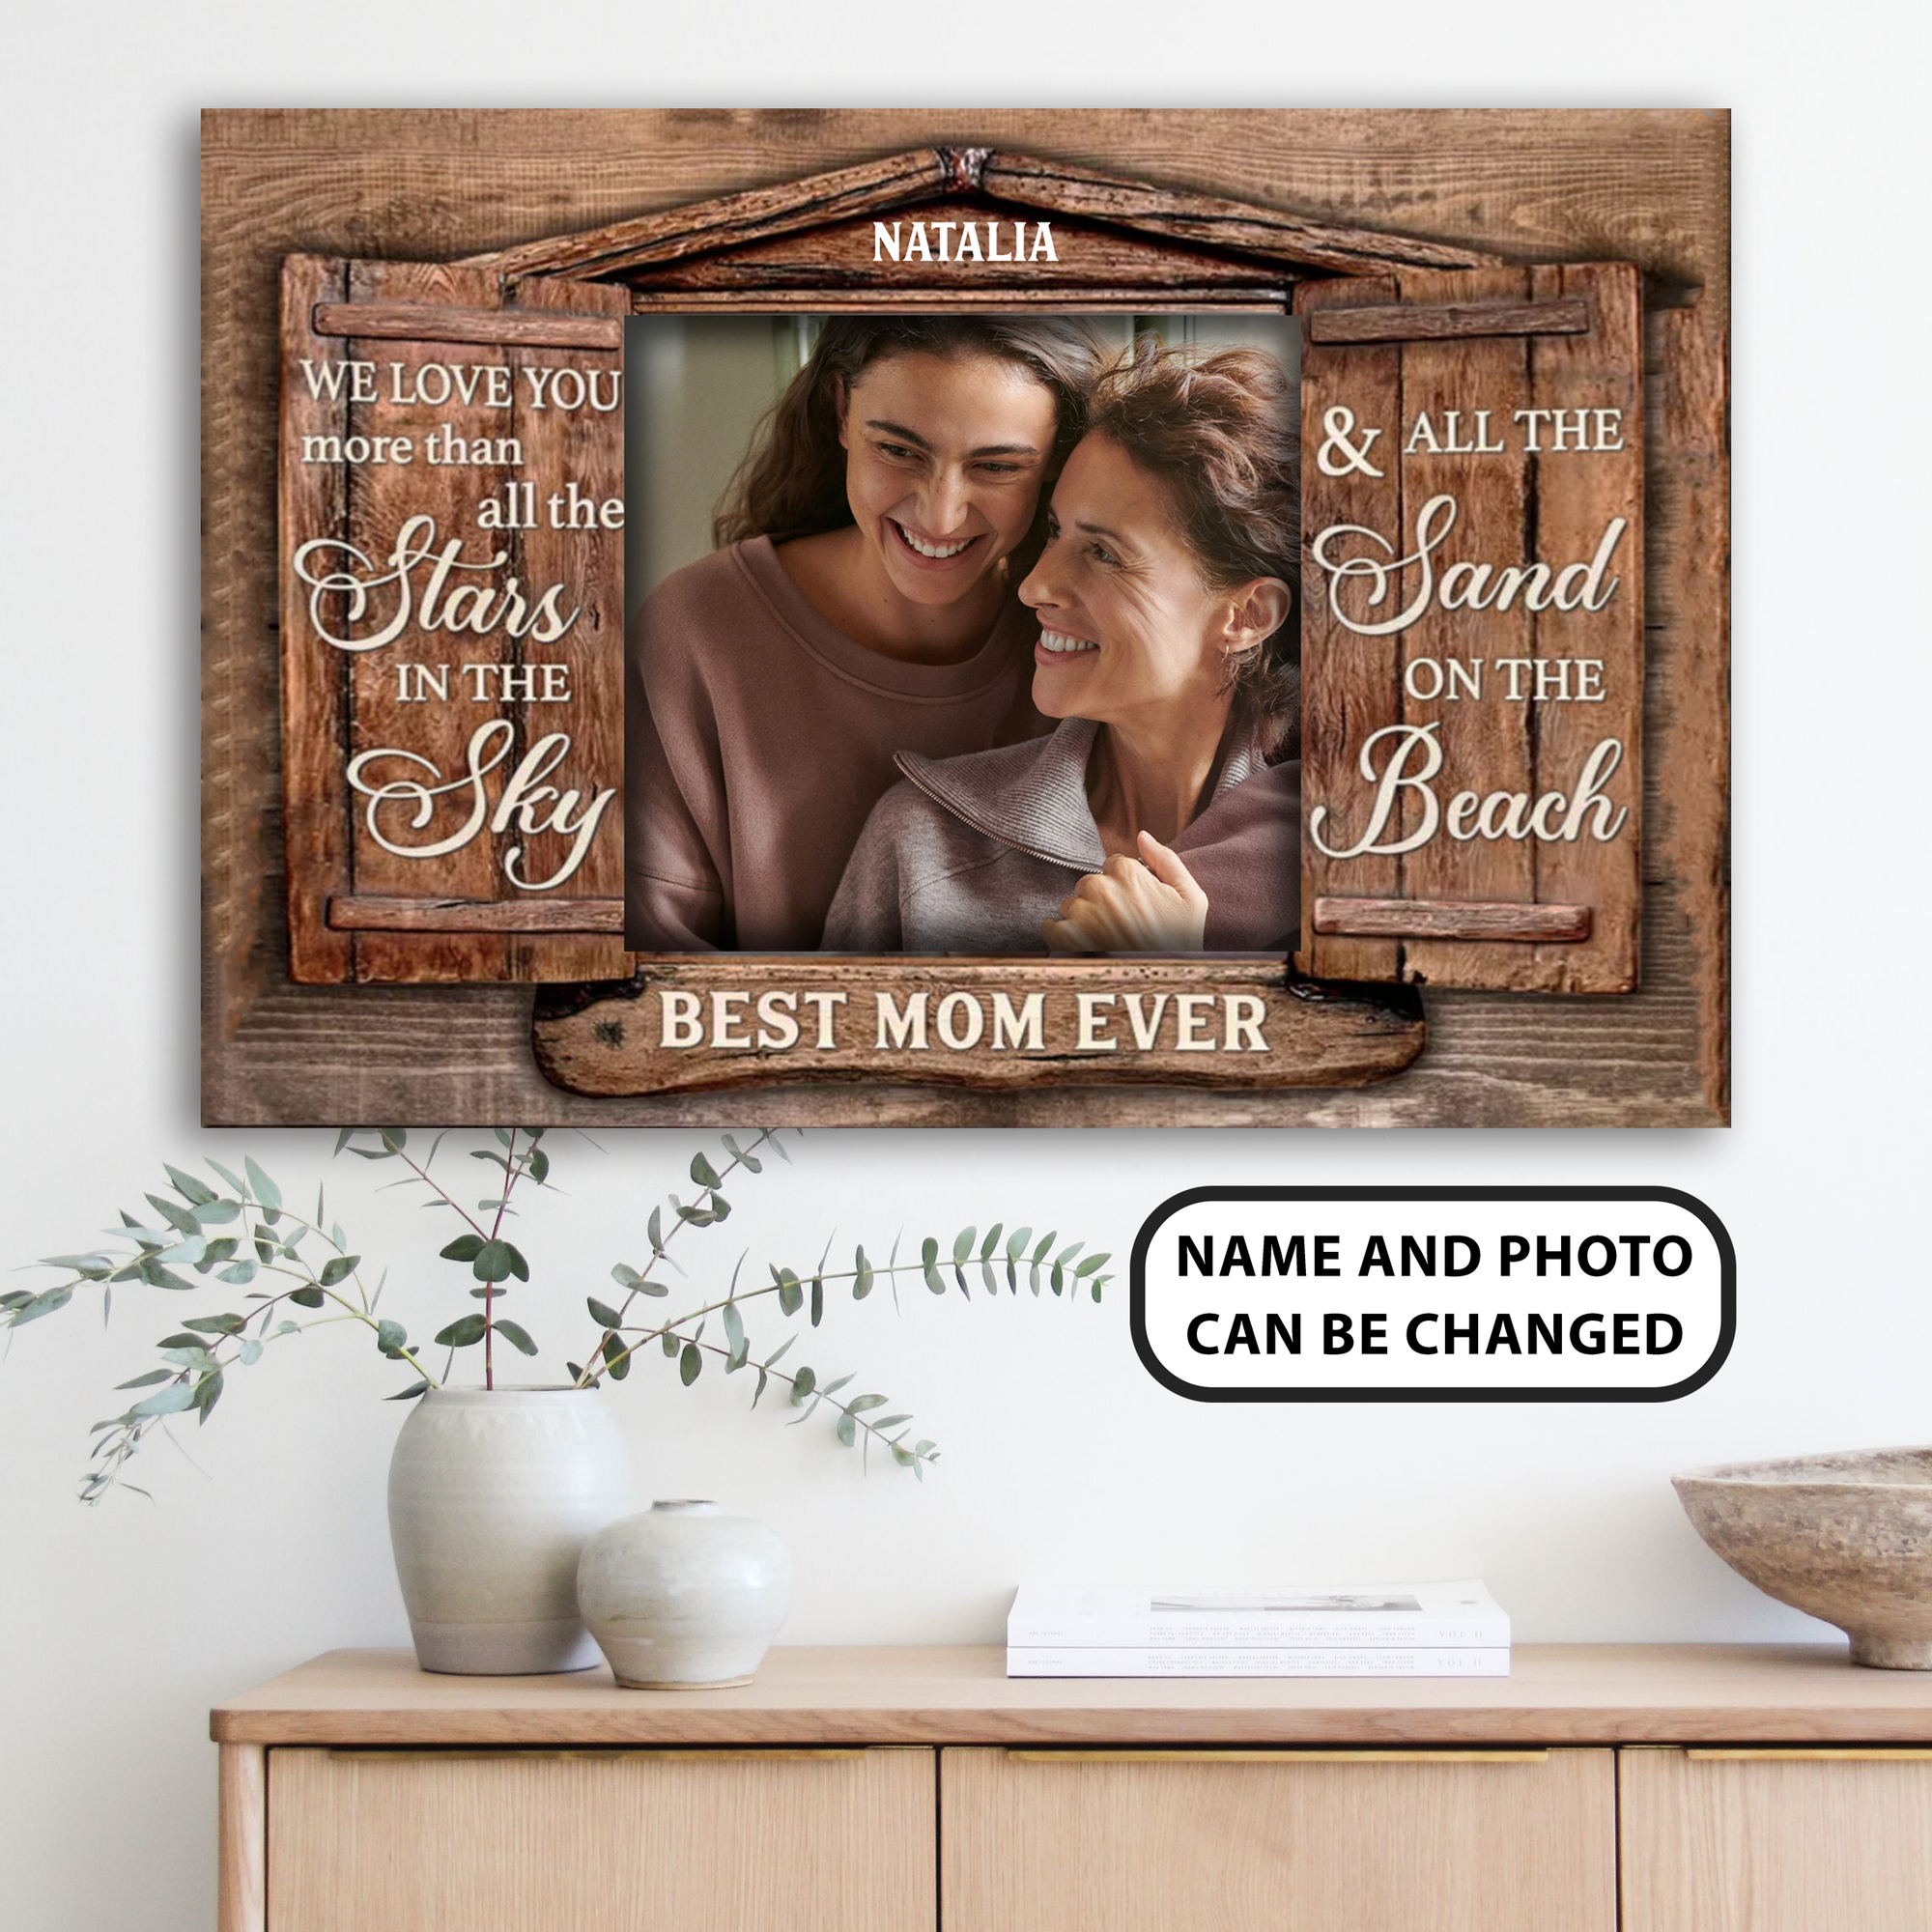 PresentsPrints, Best Mom Ever, We love you more than all the Stars in the Sky, Personalized Canvas, Mother's Day Gift